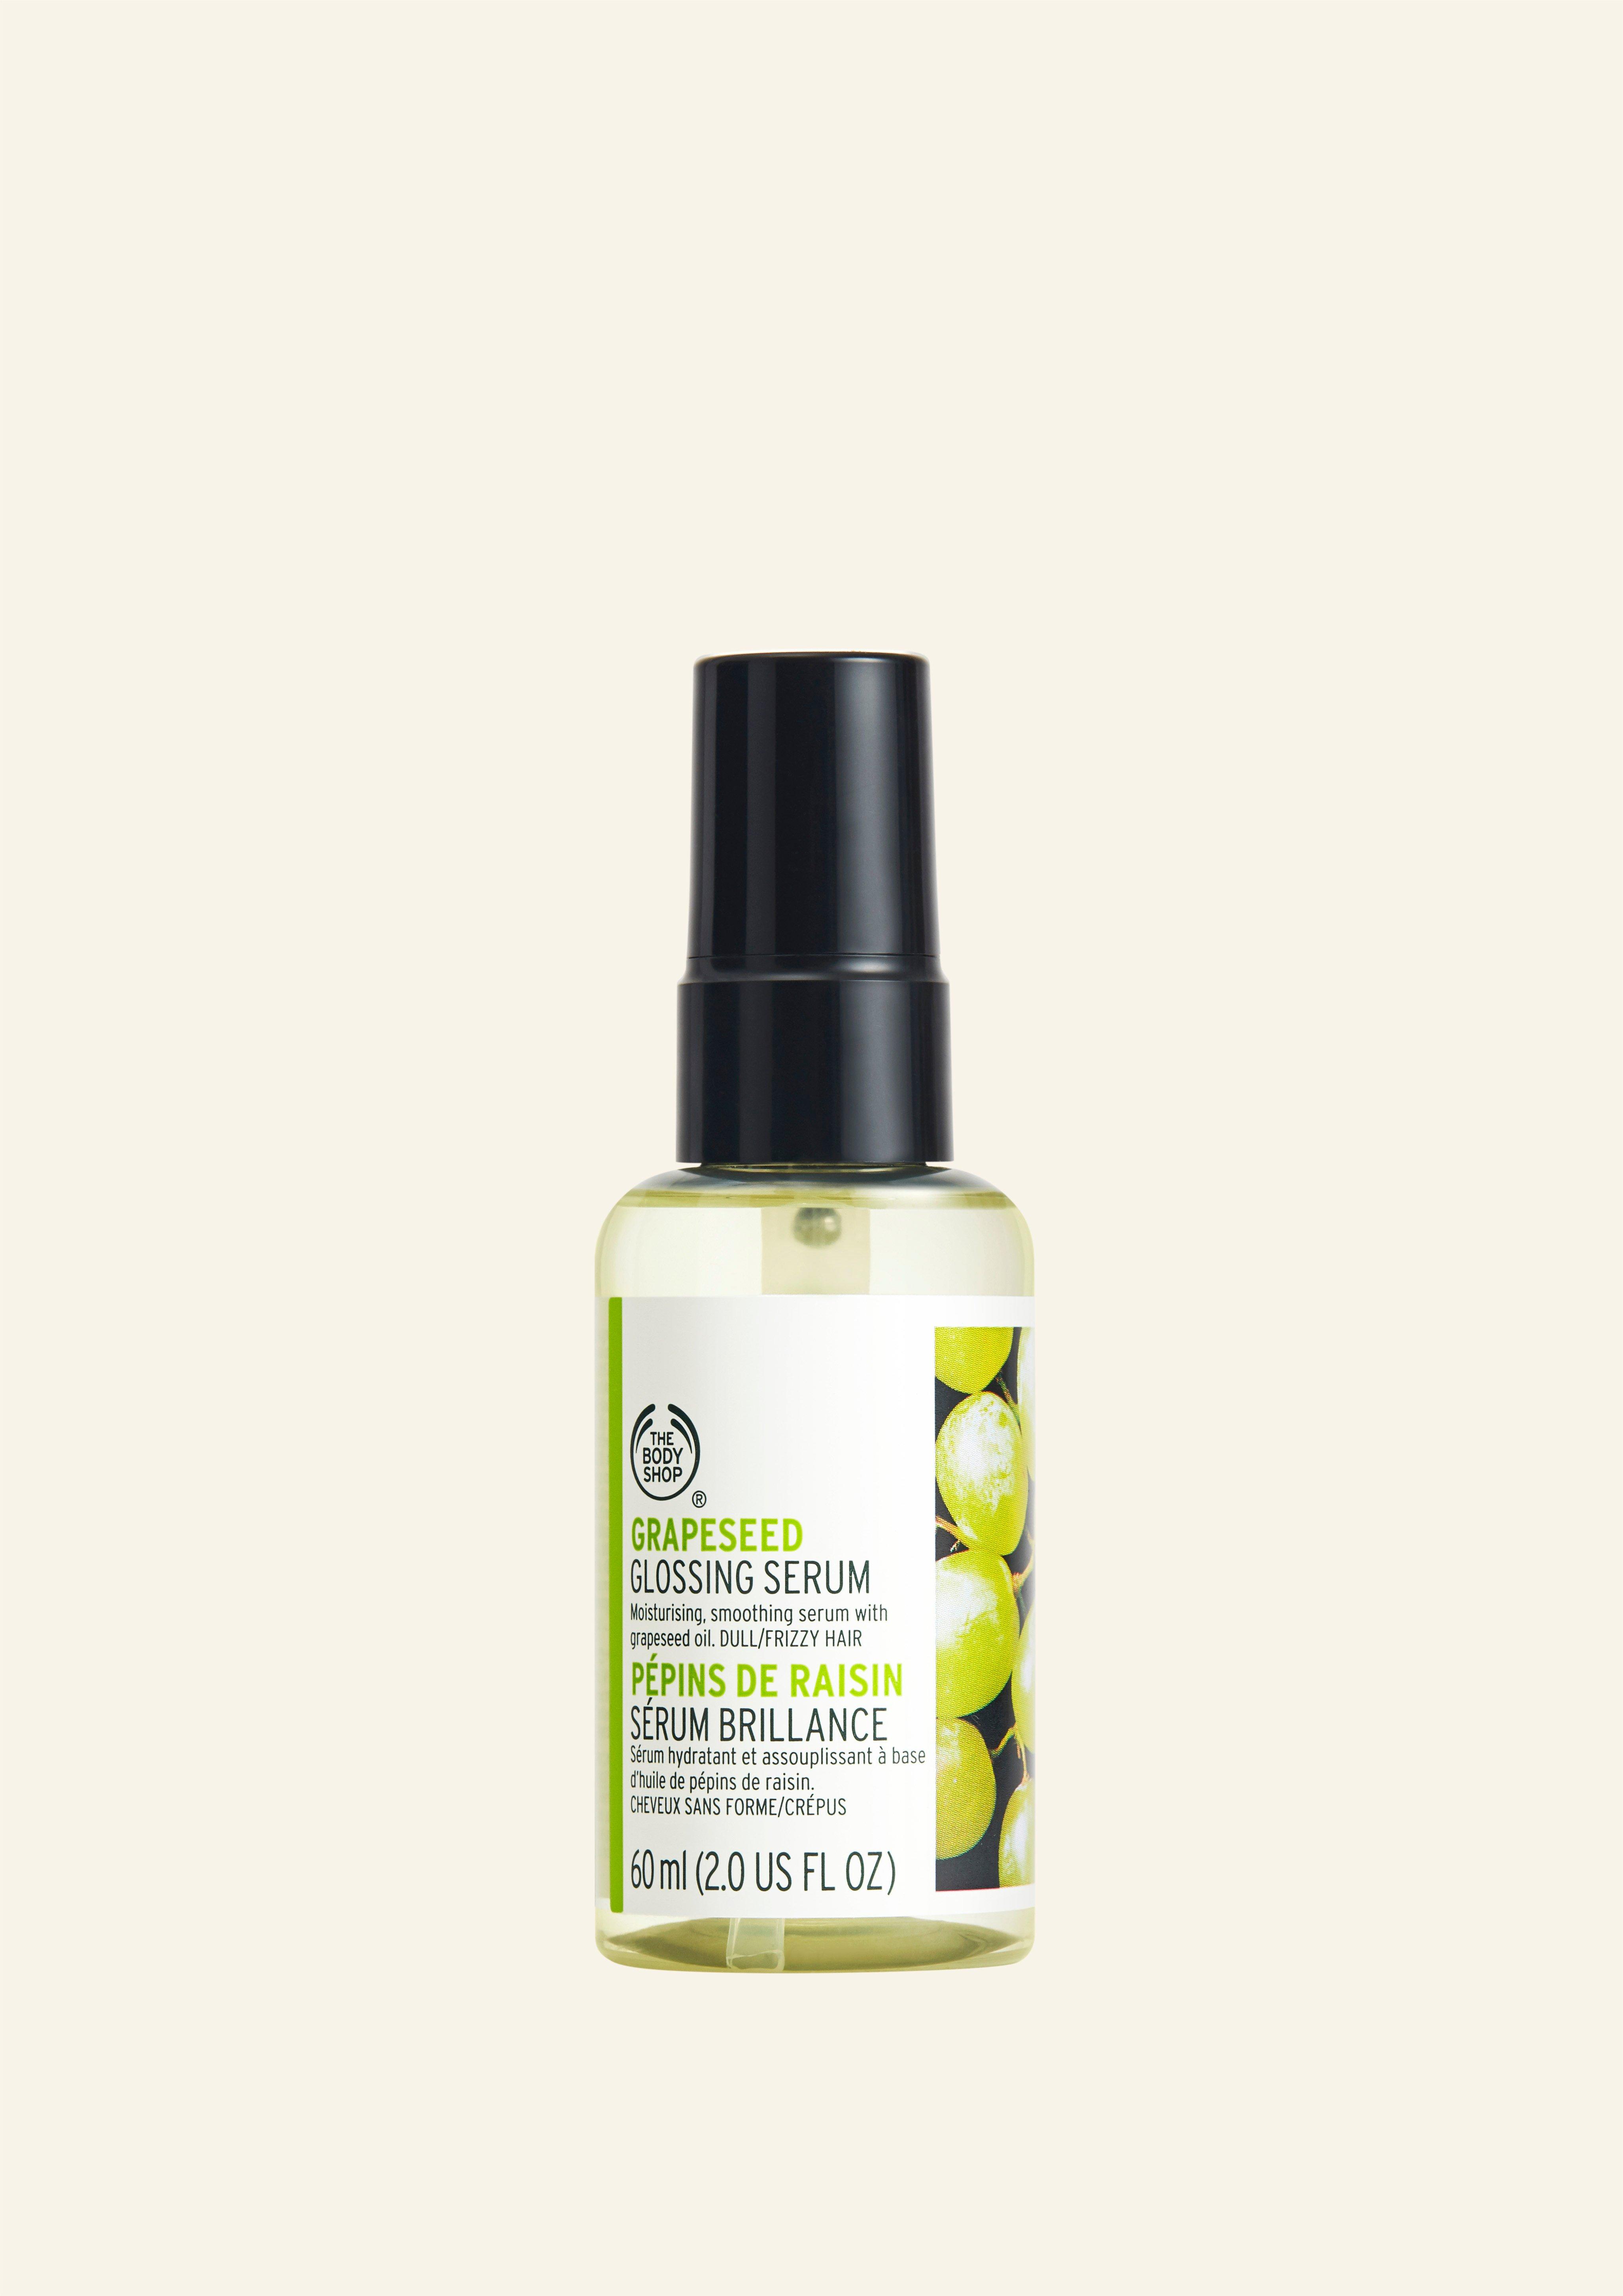 Grapeseed Glossing Serum | Haircare | The Body Shop®